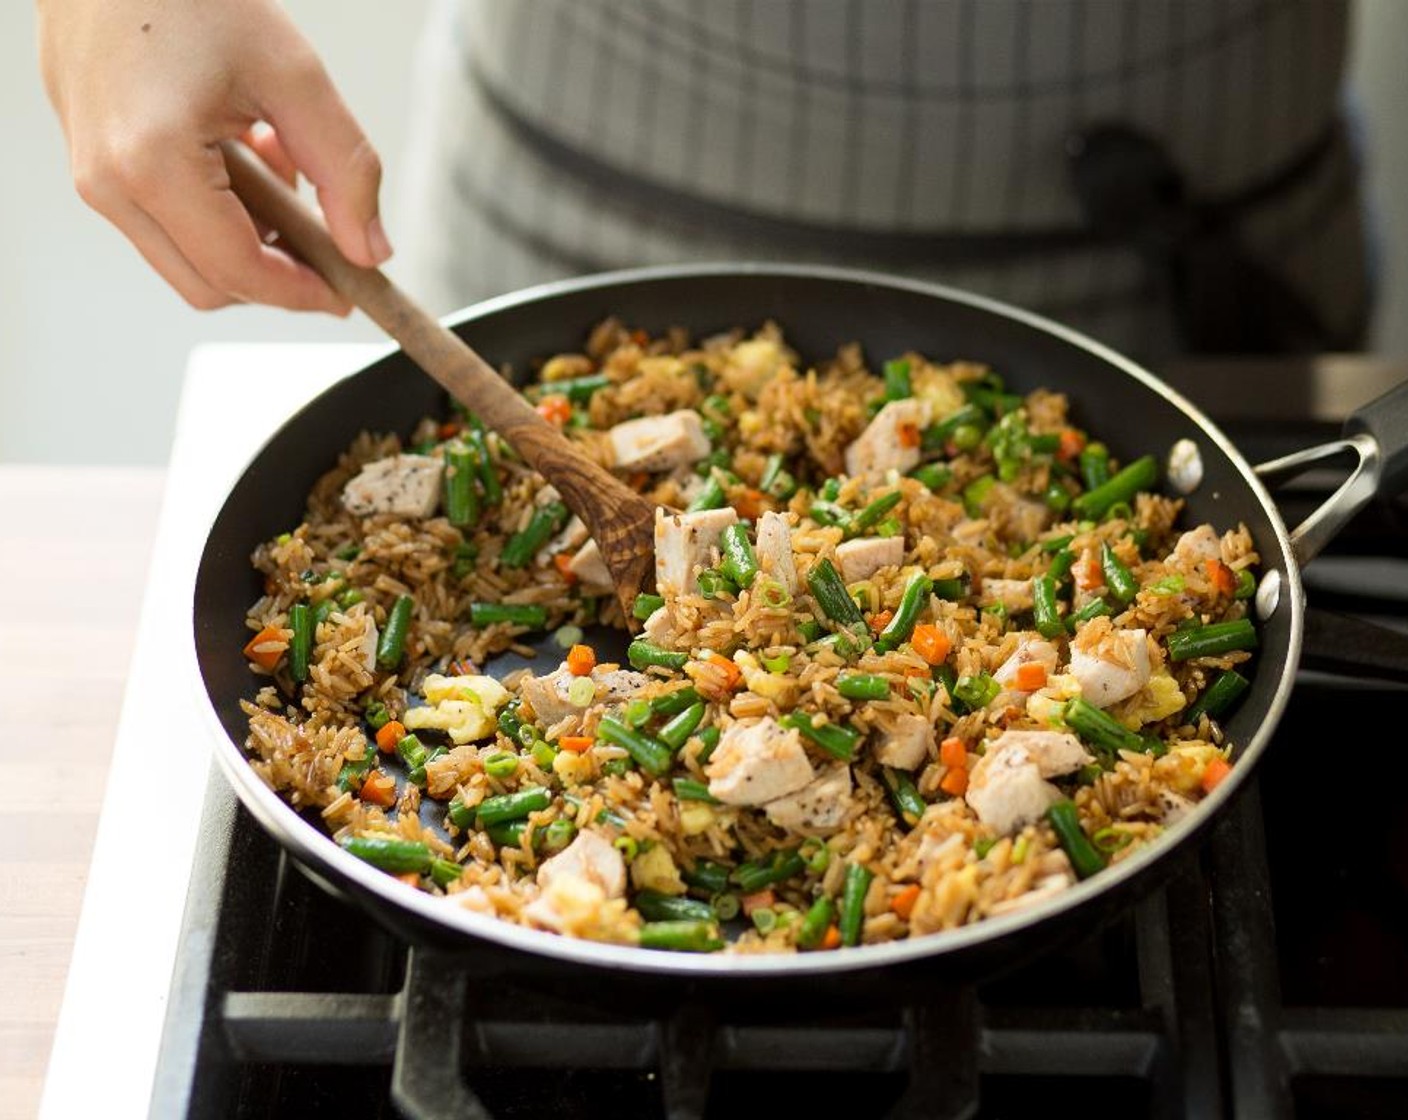 step 13 Divide the Teriyaki Chicken Fried Rice between two bowls, garnish with remaining scallions and serve and enjoy!